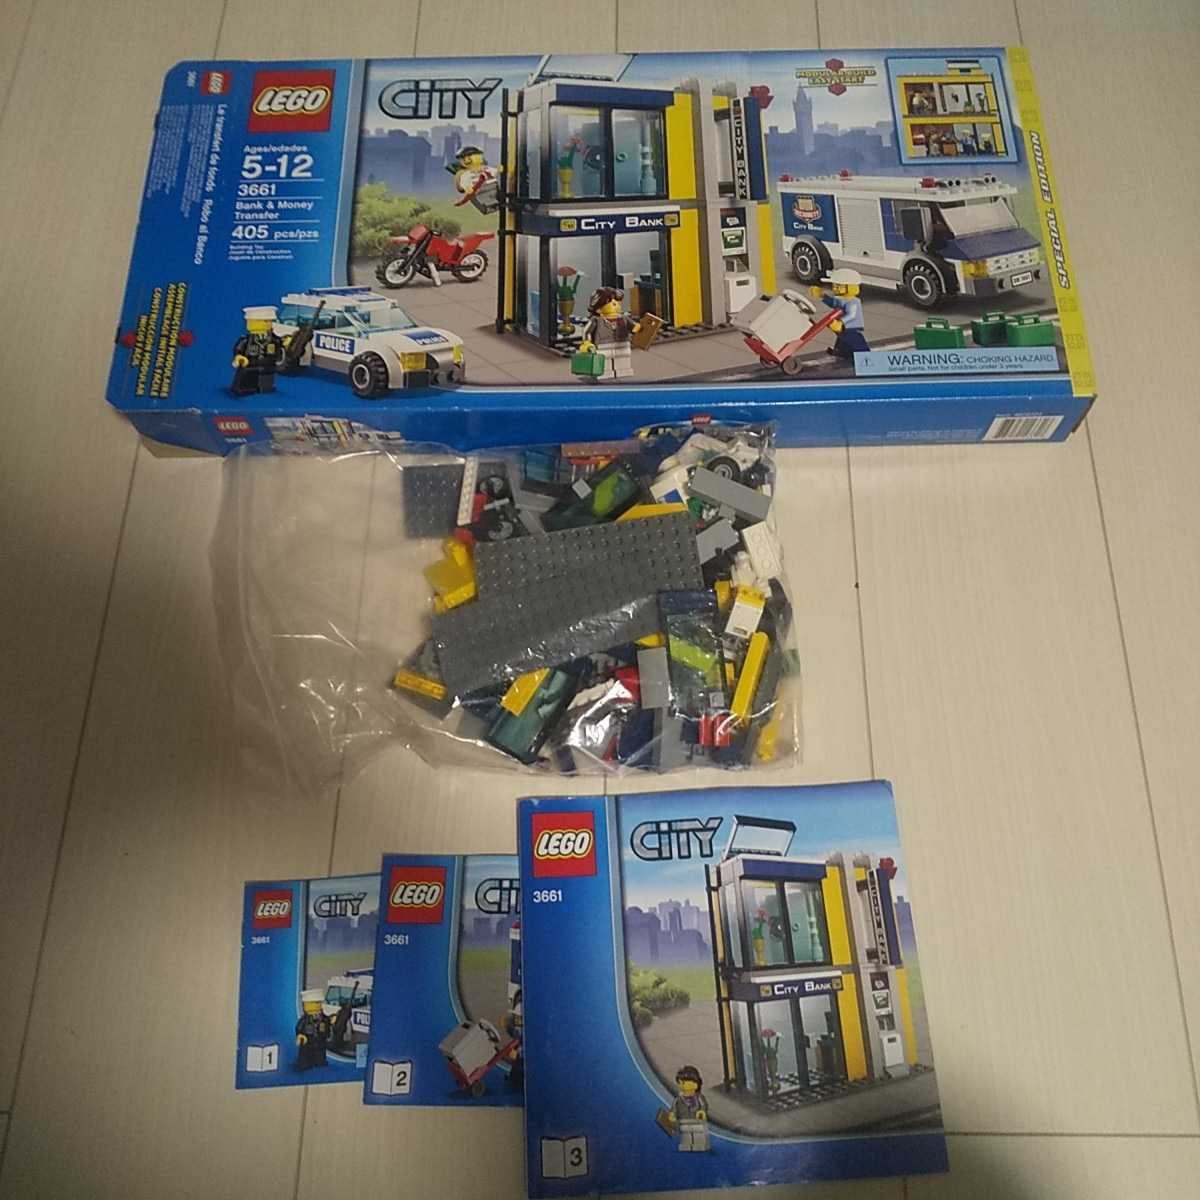 LEGO レゴ シティシリーズ12個セット 3661、4644、60014、60022、60047、60060、60119他 廃盤多数 船、飛行機、ポリス 送料無料 product details | Proxy bidding and service for auctions and shopping within Japan and the United States - Get ...